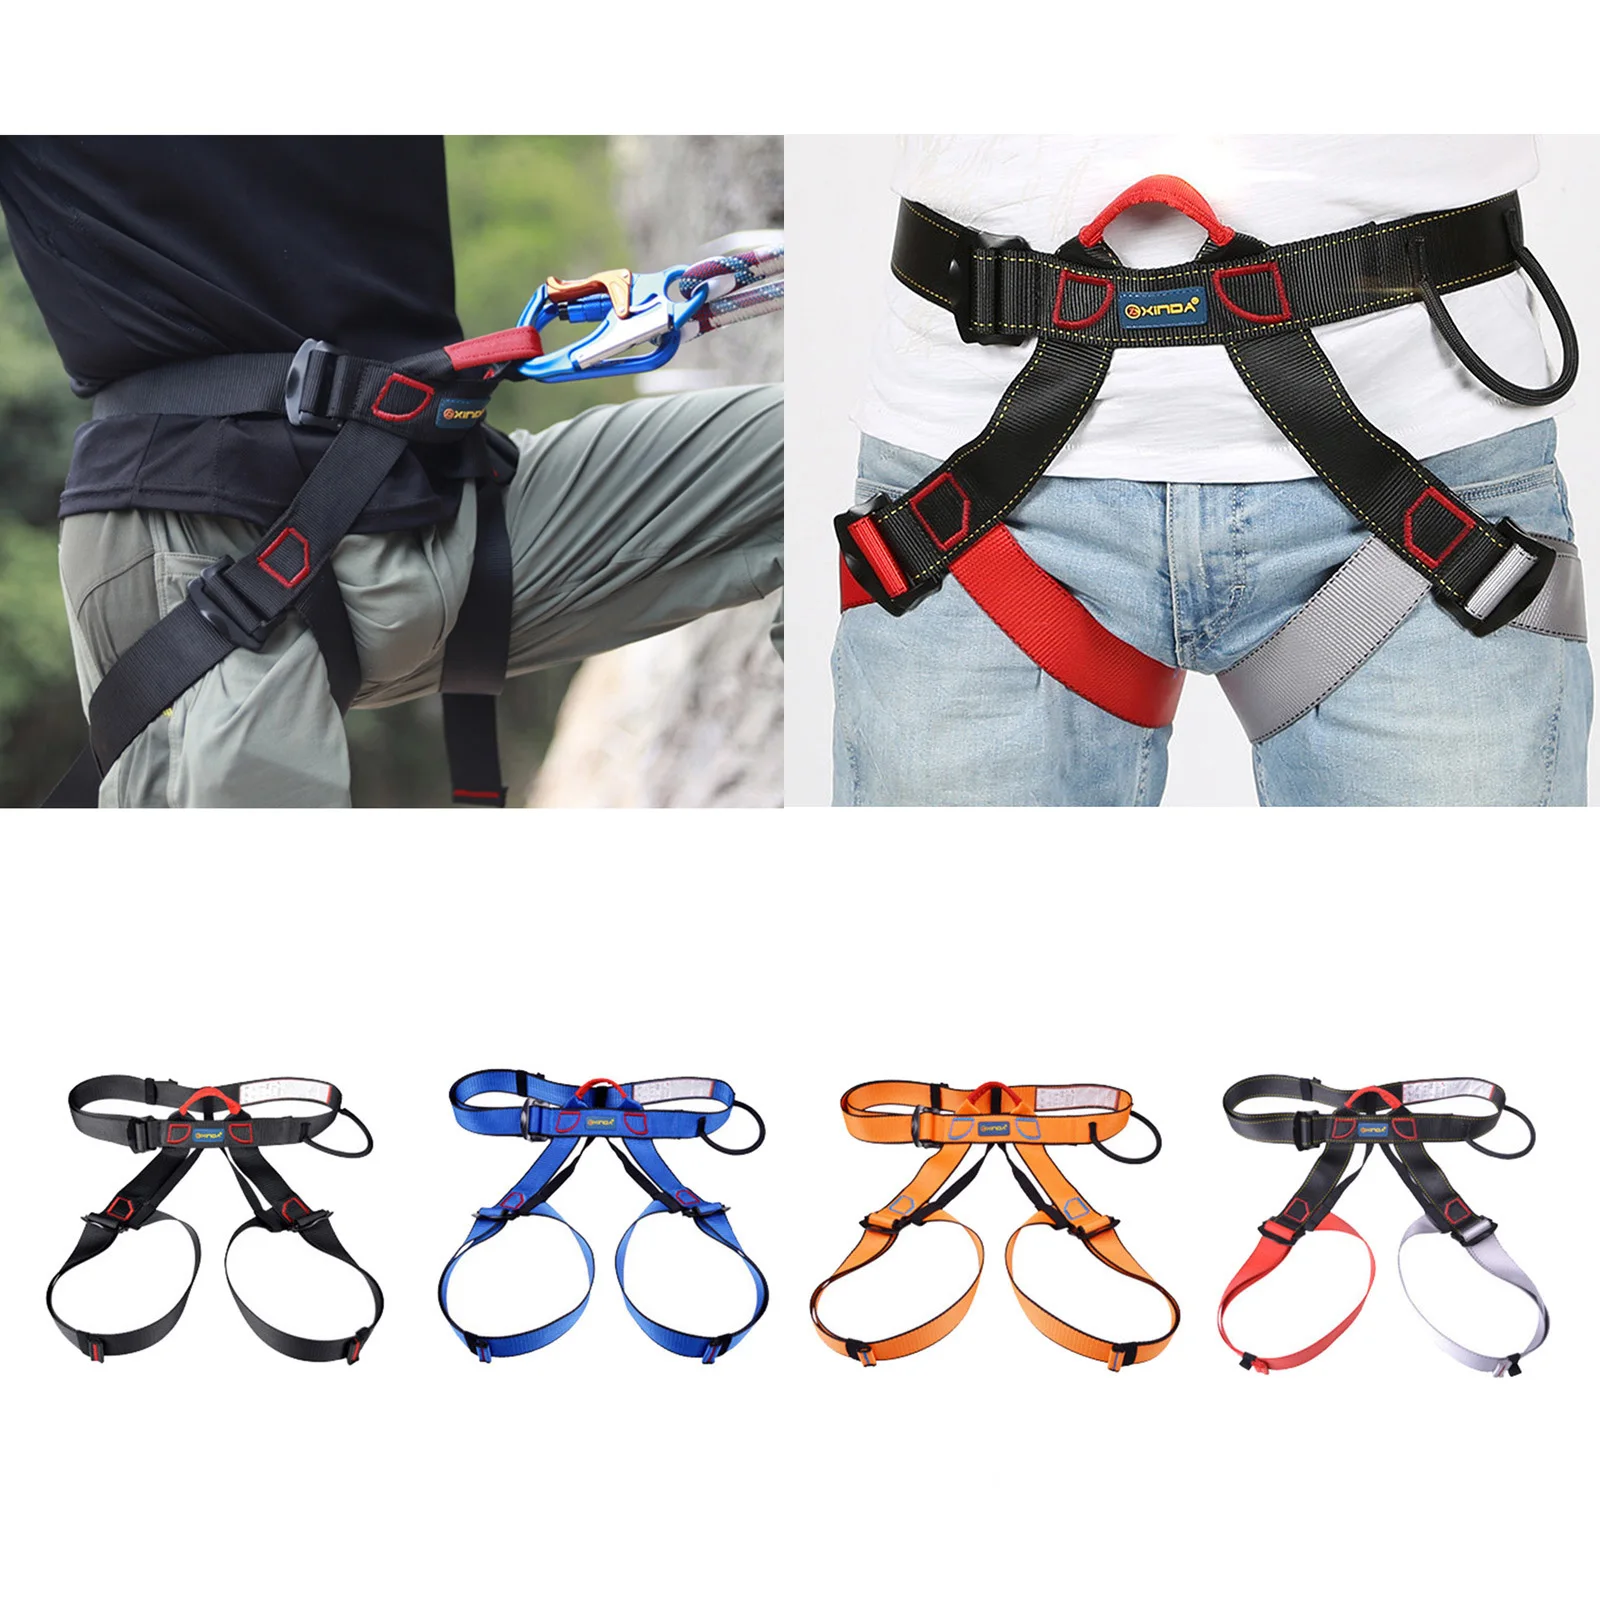 Climbing Harness 300kg Half Body Safety Belt Rescuing Survival Accessories